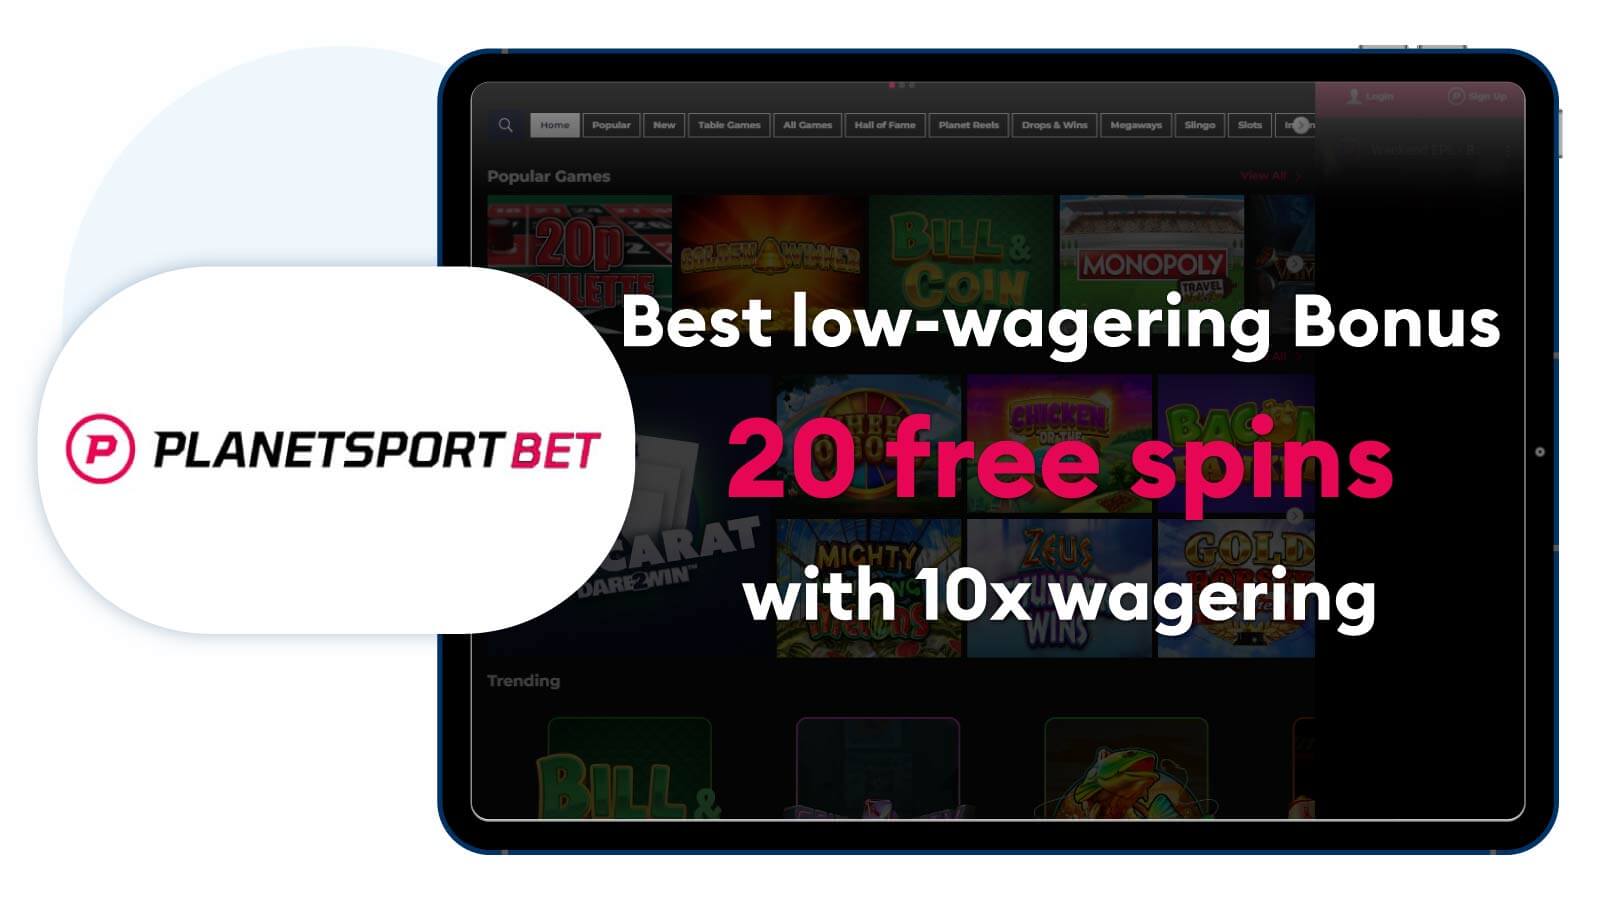 Best-low-wagering-registration-bonus-20-free-spins-with-10x-wagering-at-Planet-Sport-Bet